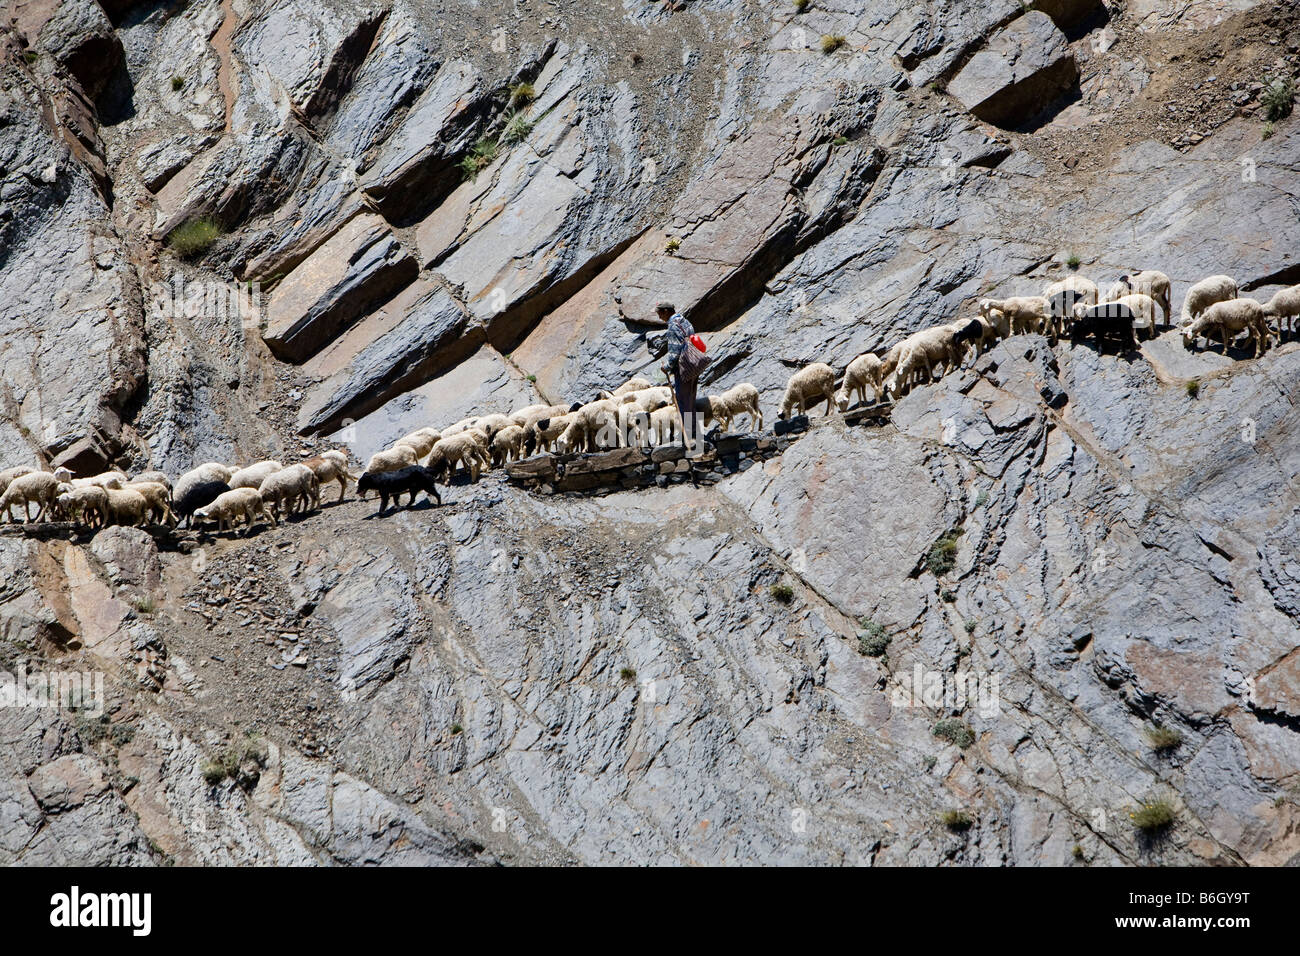 A sheep herder guides his flock across a trail on steep rock face near the Tizi n Tichka Pass of Morocco. Stock Photo